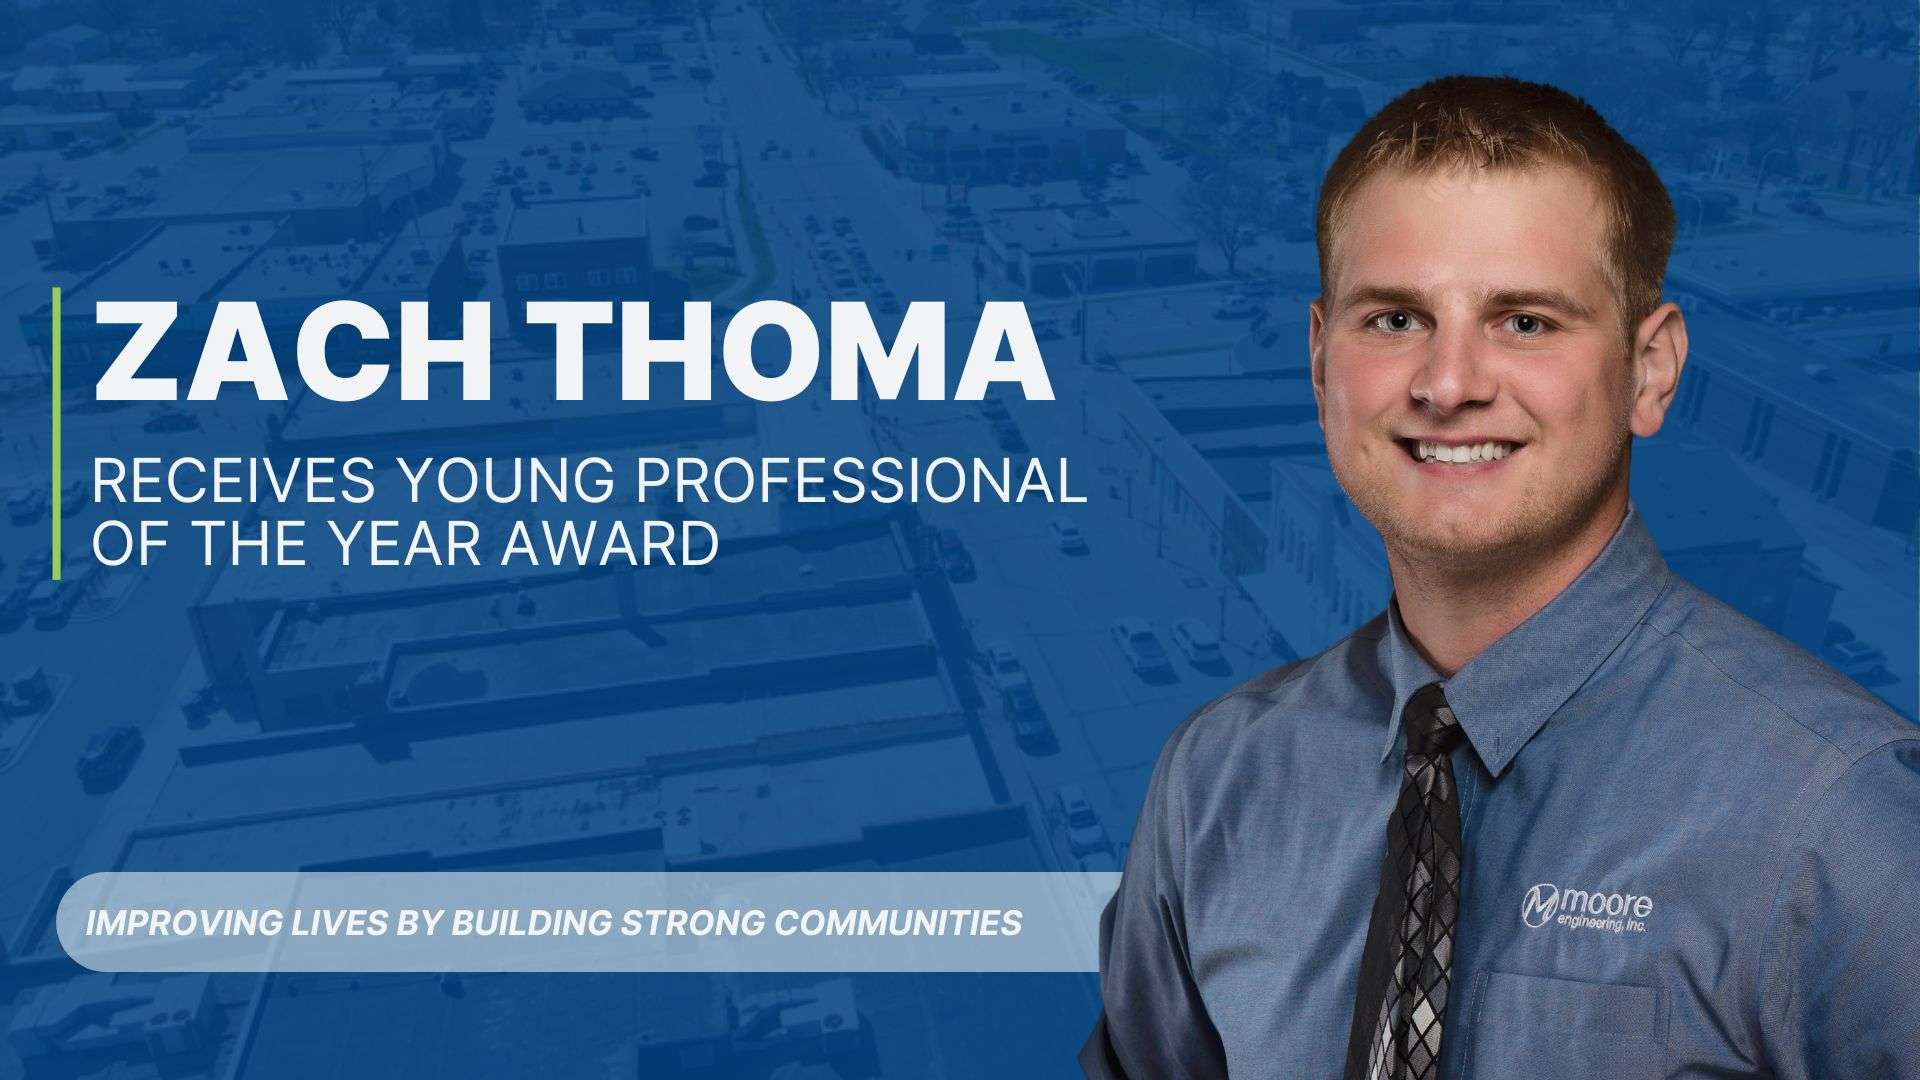 Zach Thoma, Engineer at Moore Engineering, wins Young Professional of the Year Award. b